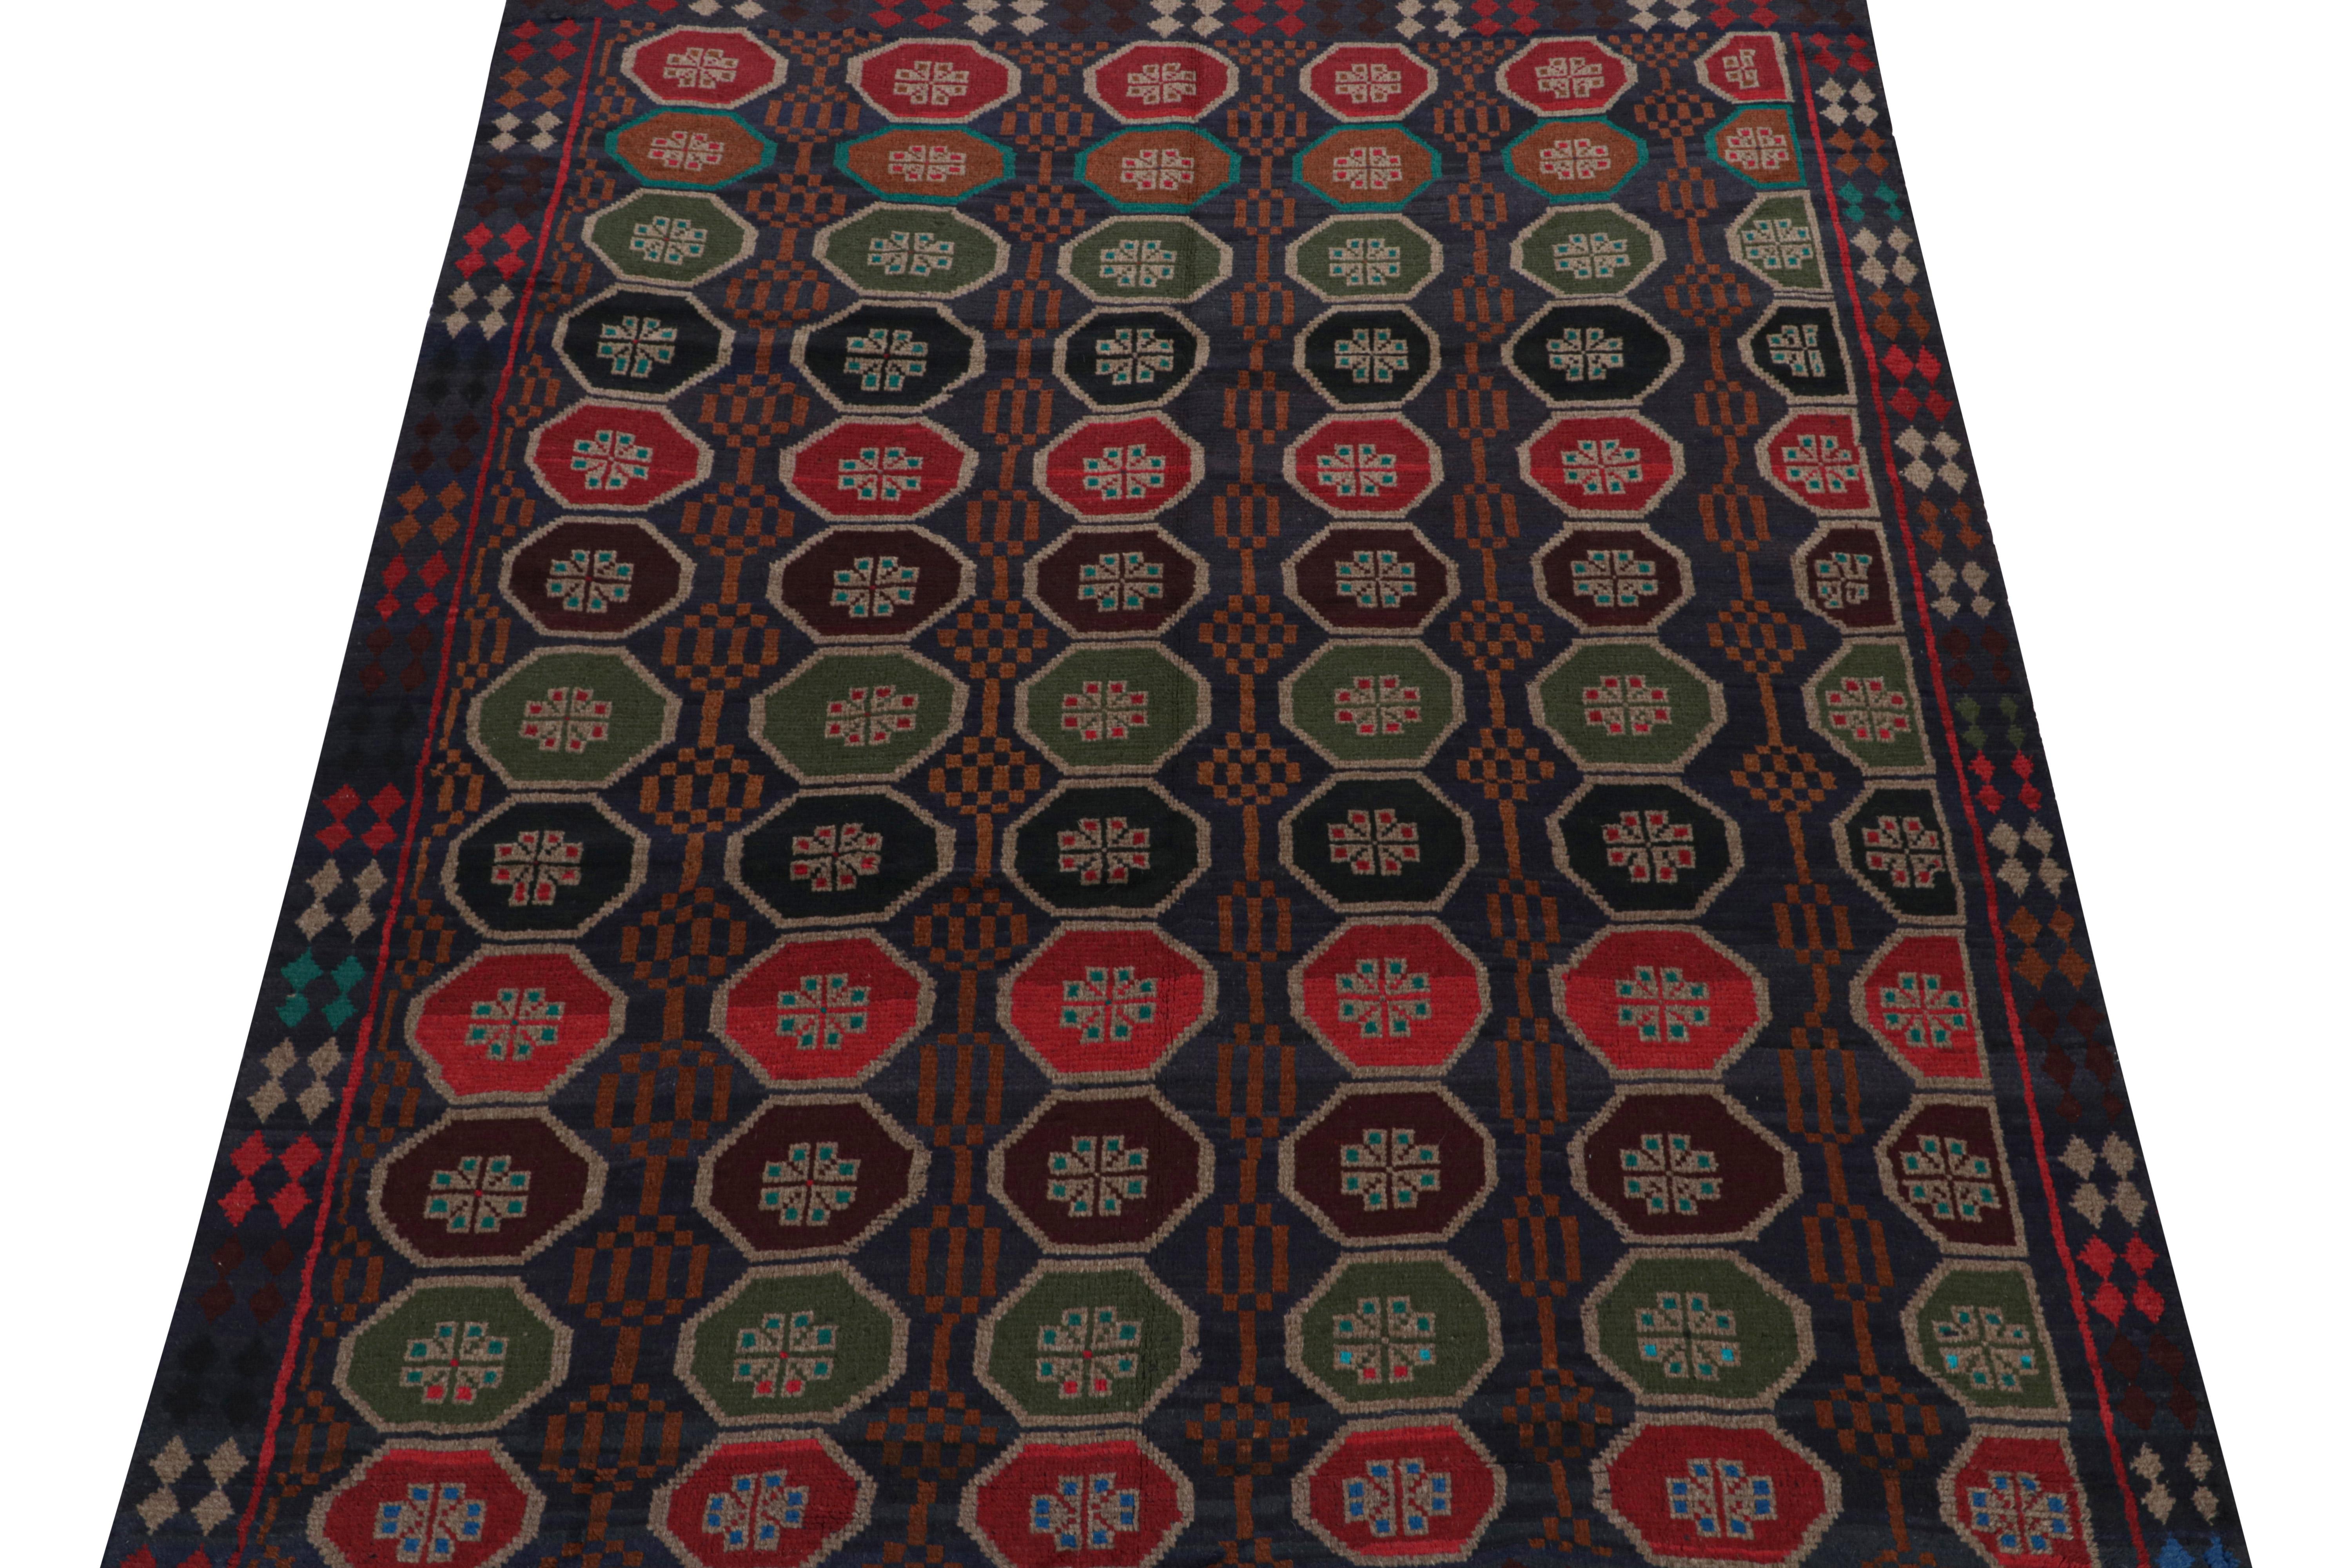 Afghan Rug & Kilim’s Baluch Tribal Rug in Brown with Colorful Hexagon Patterns For Sale